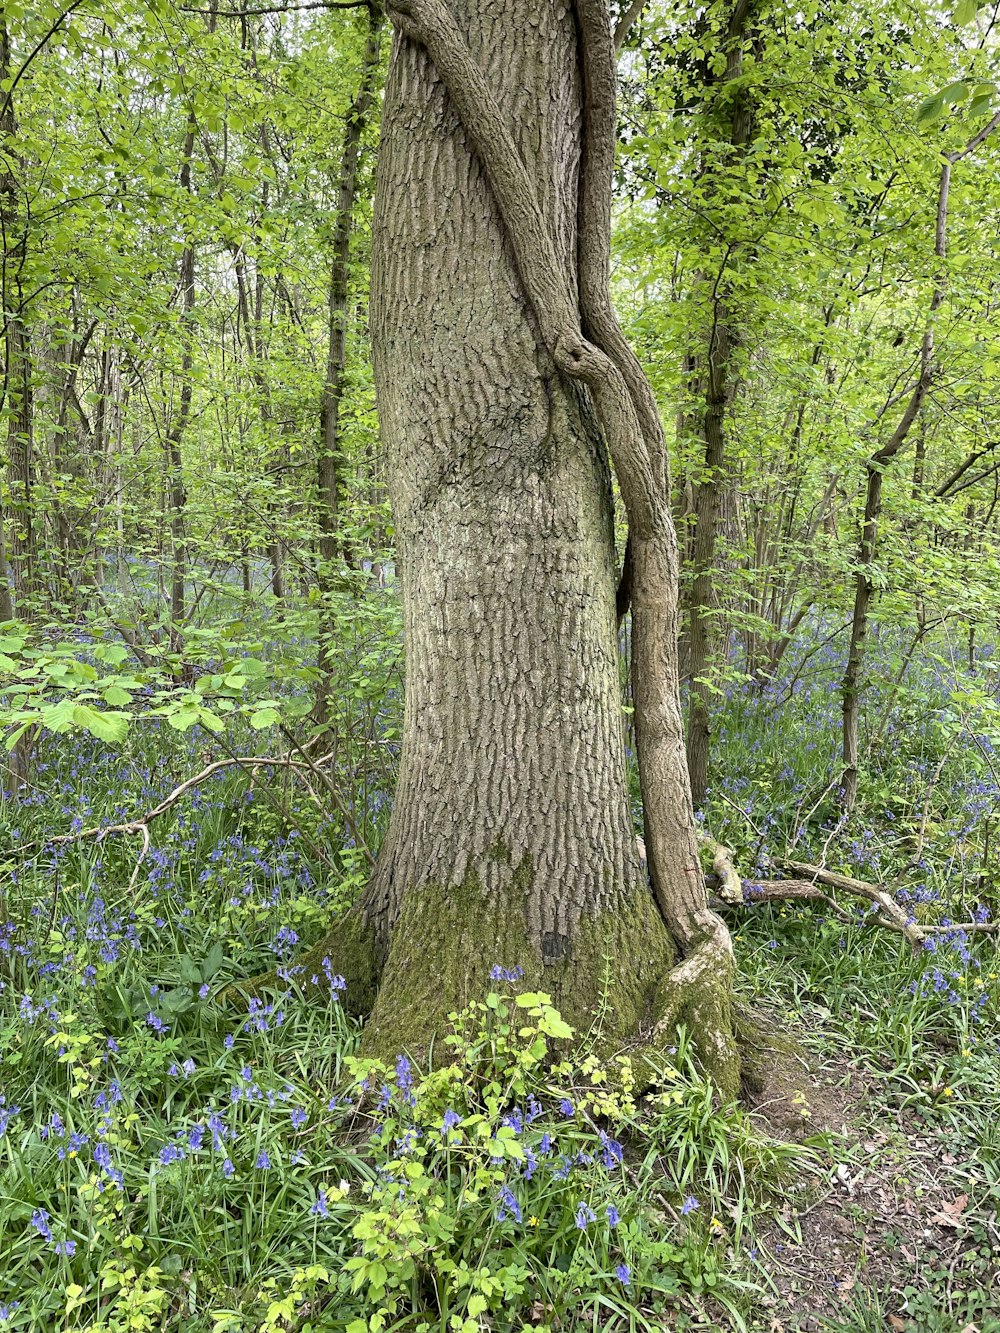 a tree with many branches and flowers